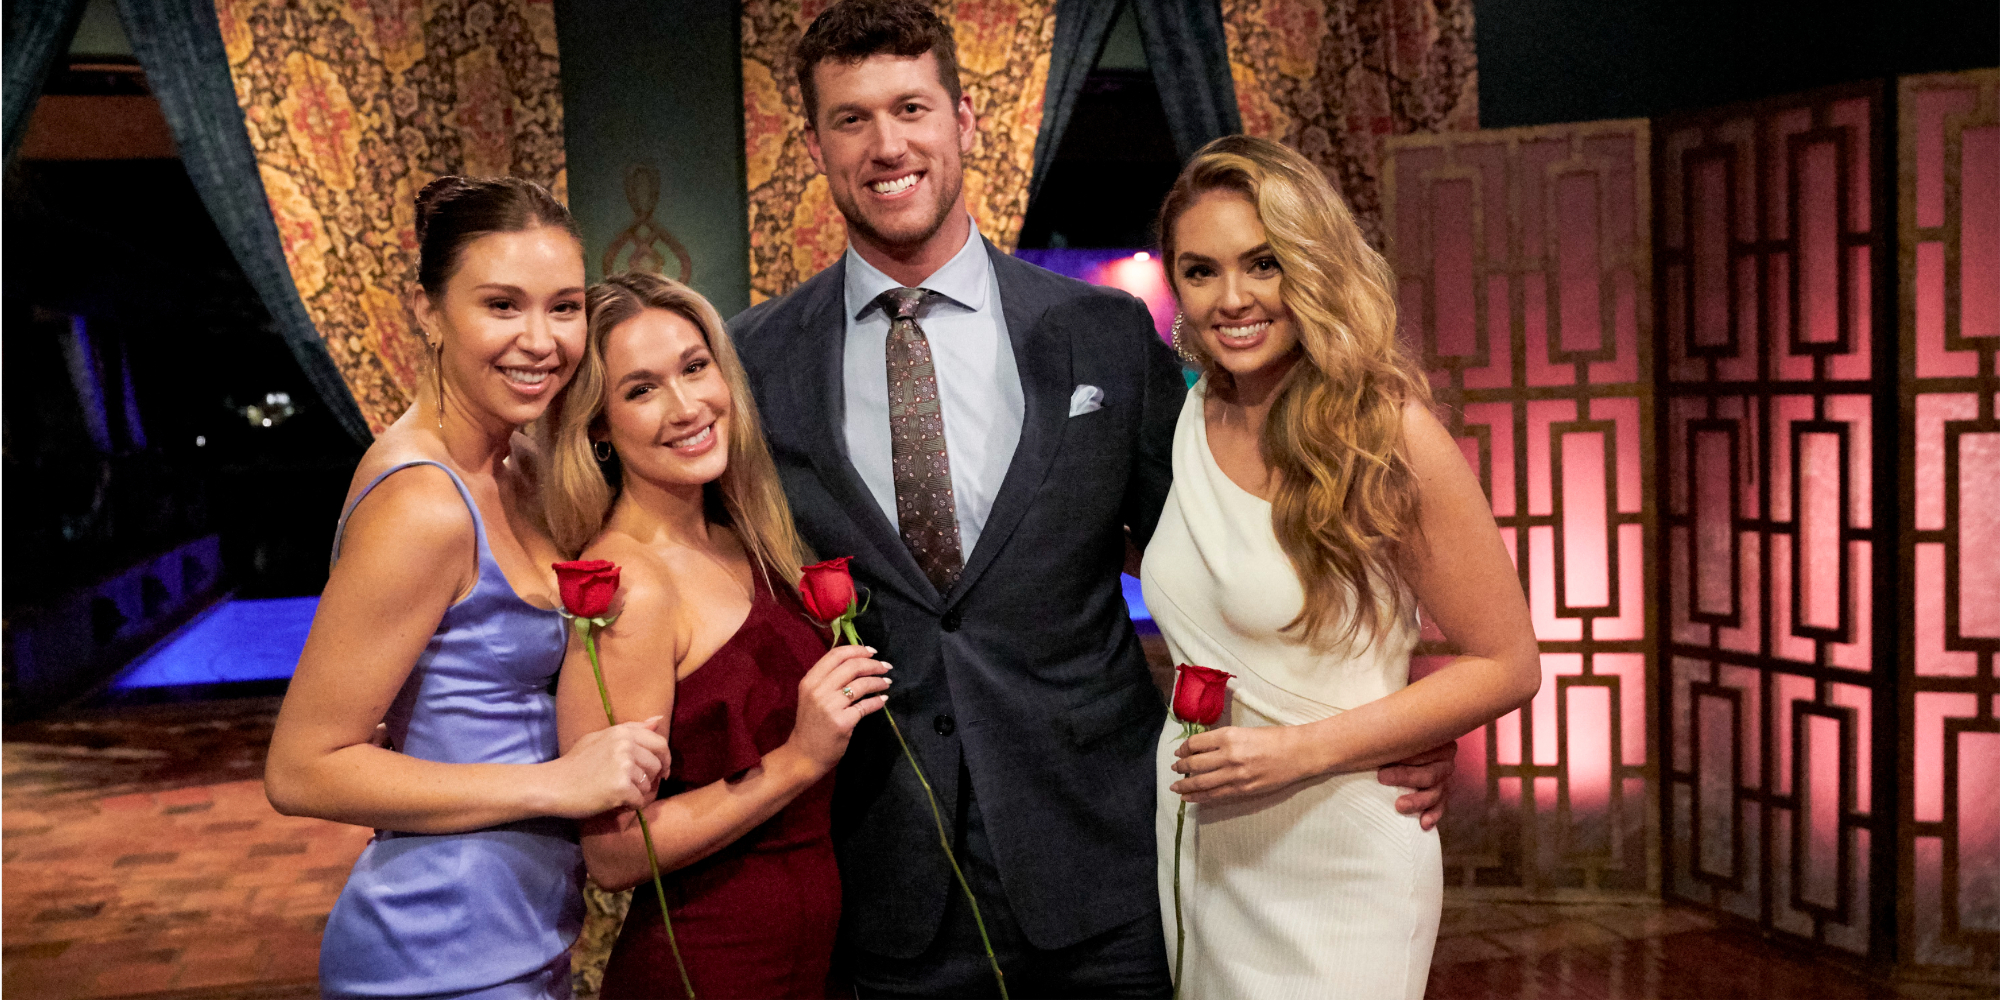 Clayton Echard and finalists Susie Evans, Gabby Windey, and Rachel Recchia on 'The Bachelor.'